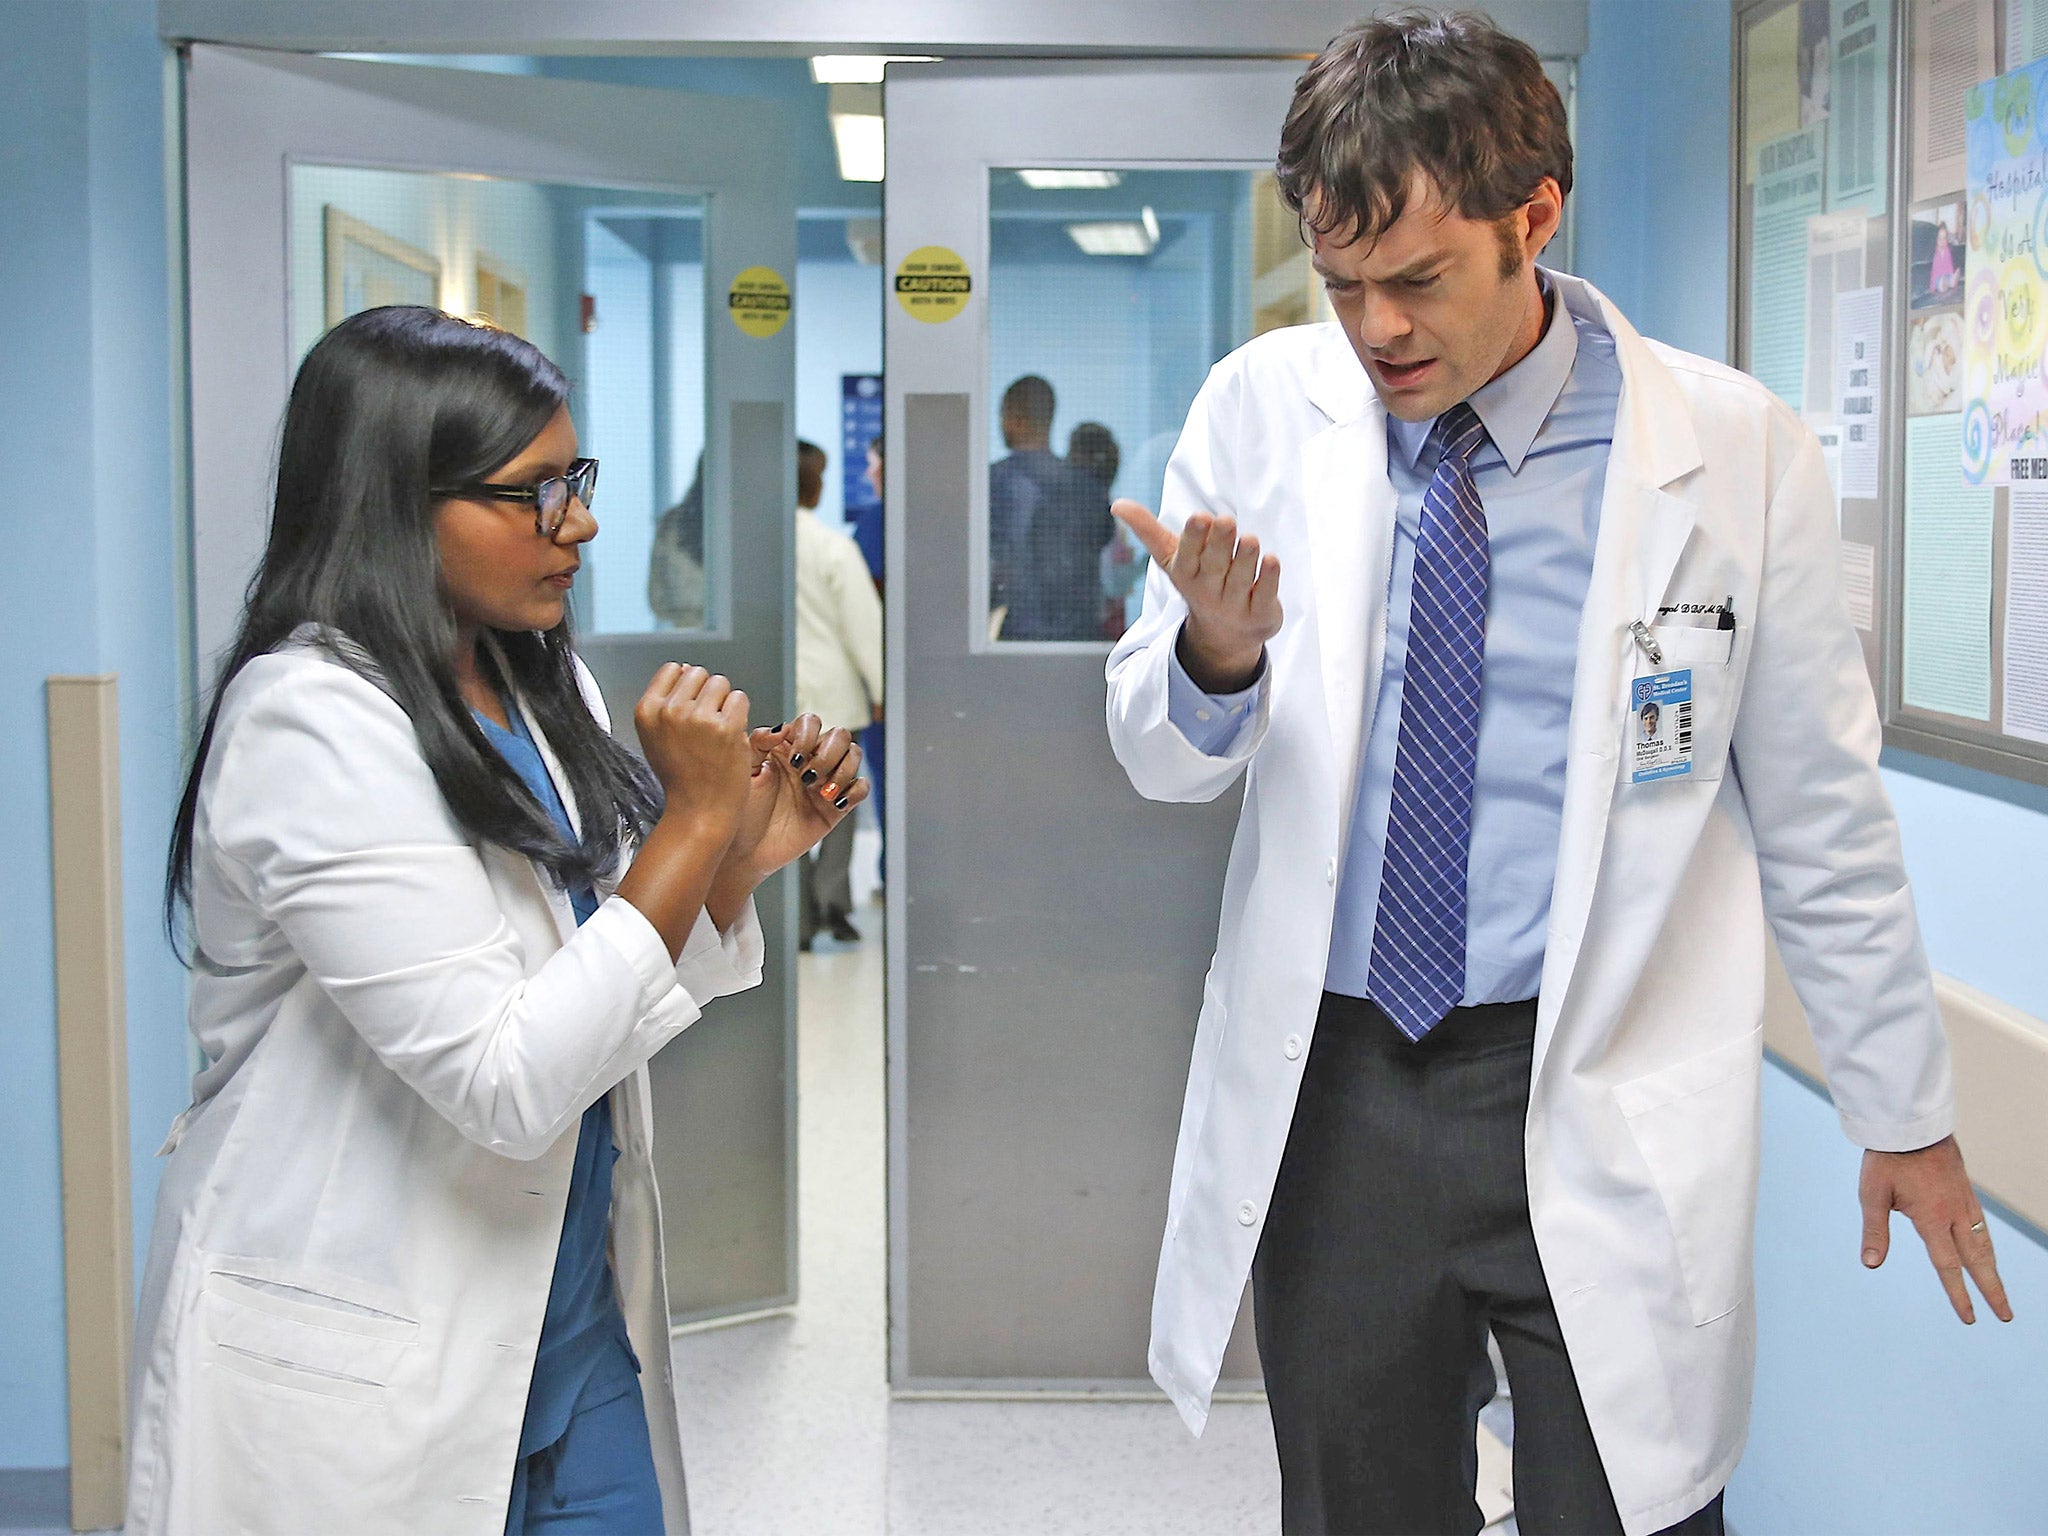 Mindy Kaling starring in The Mindy Project, axed by Fox after three seasons